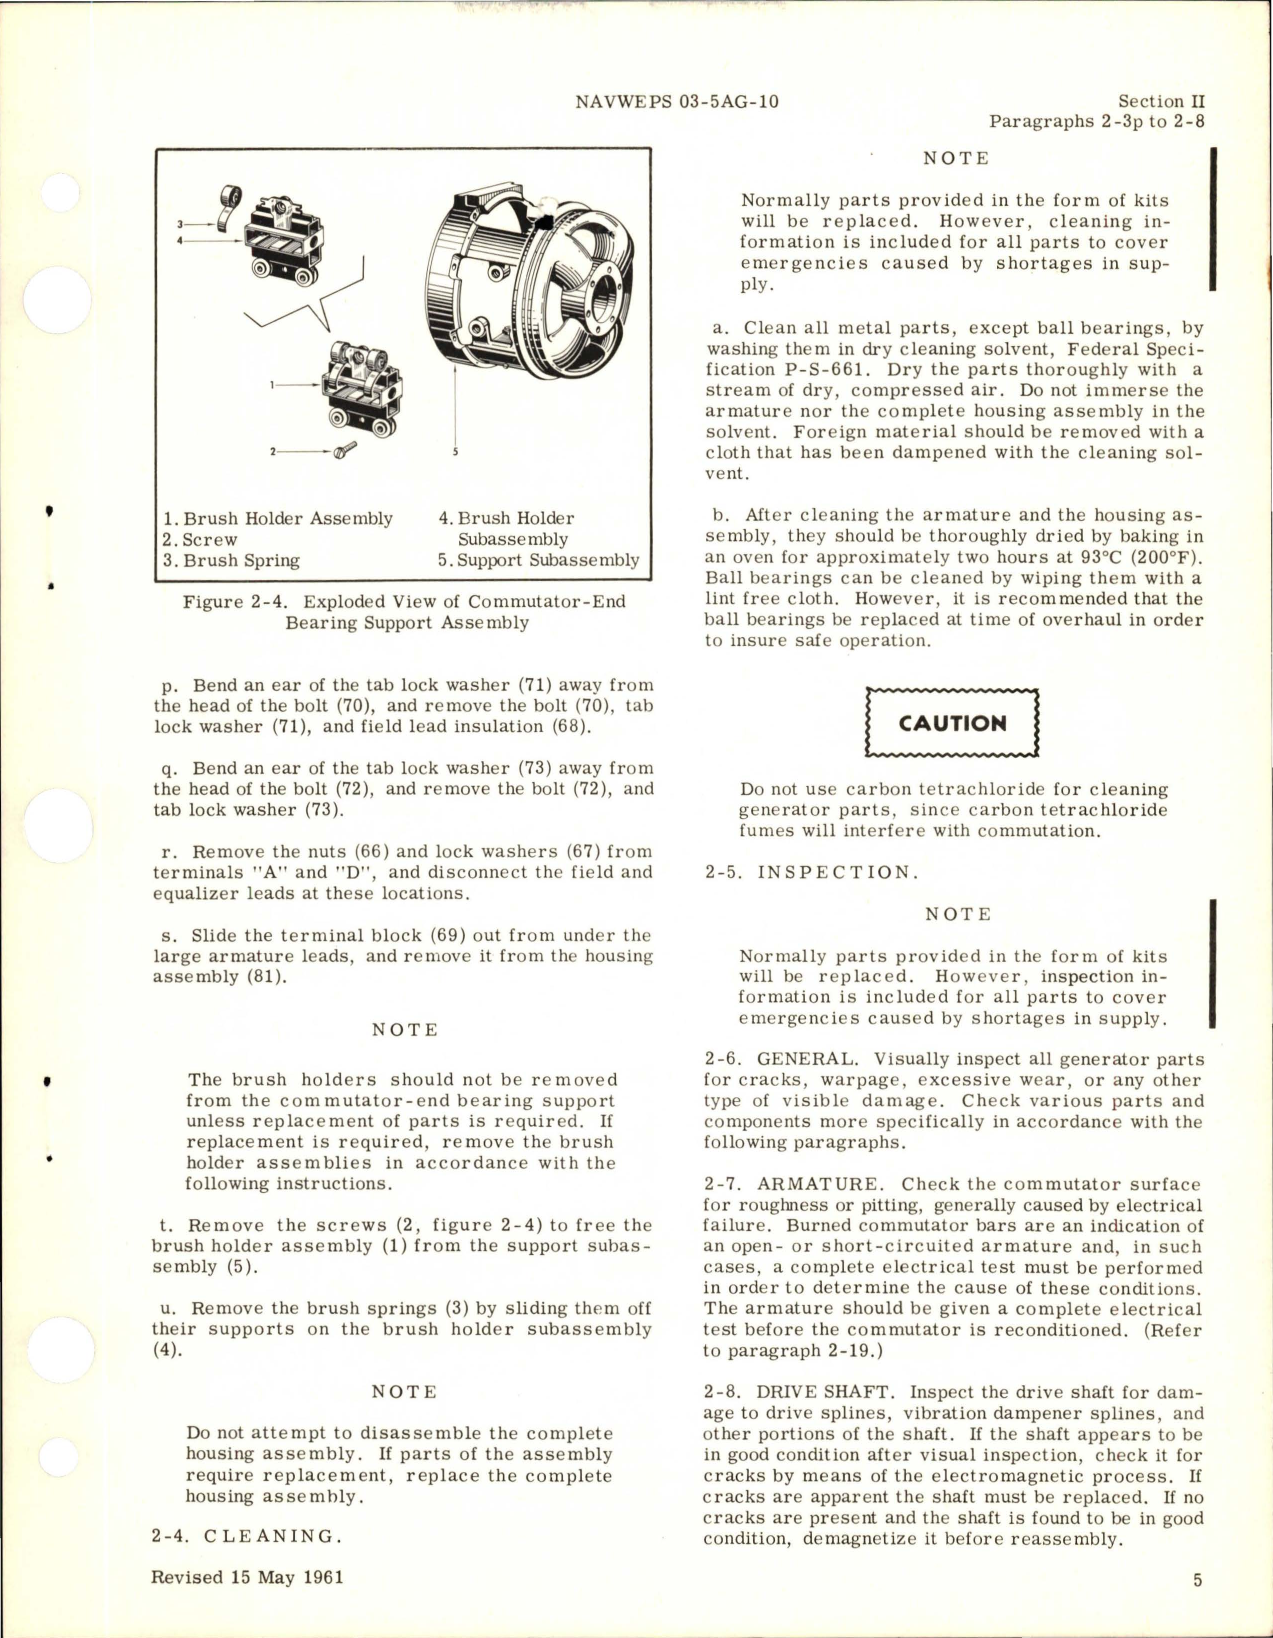 Sample page 7 from AirCorps Library document: Overhaul Instructions for Generator 